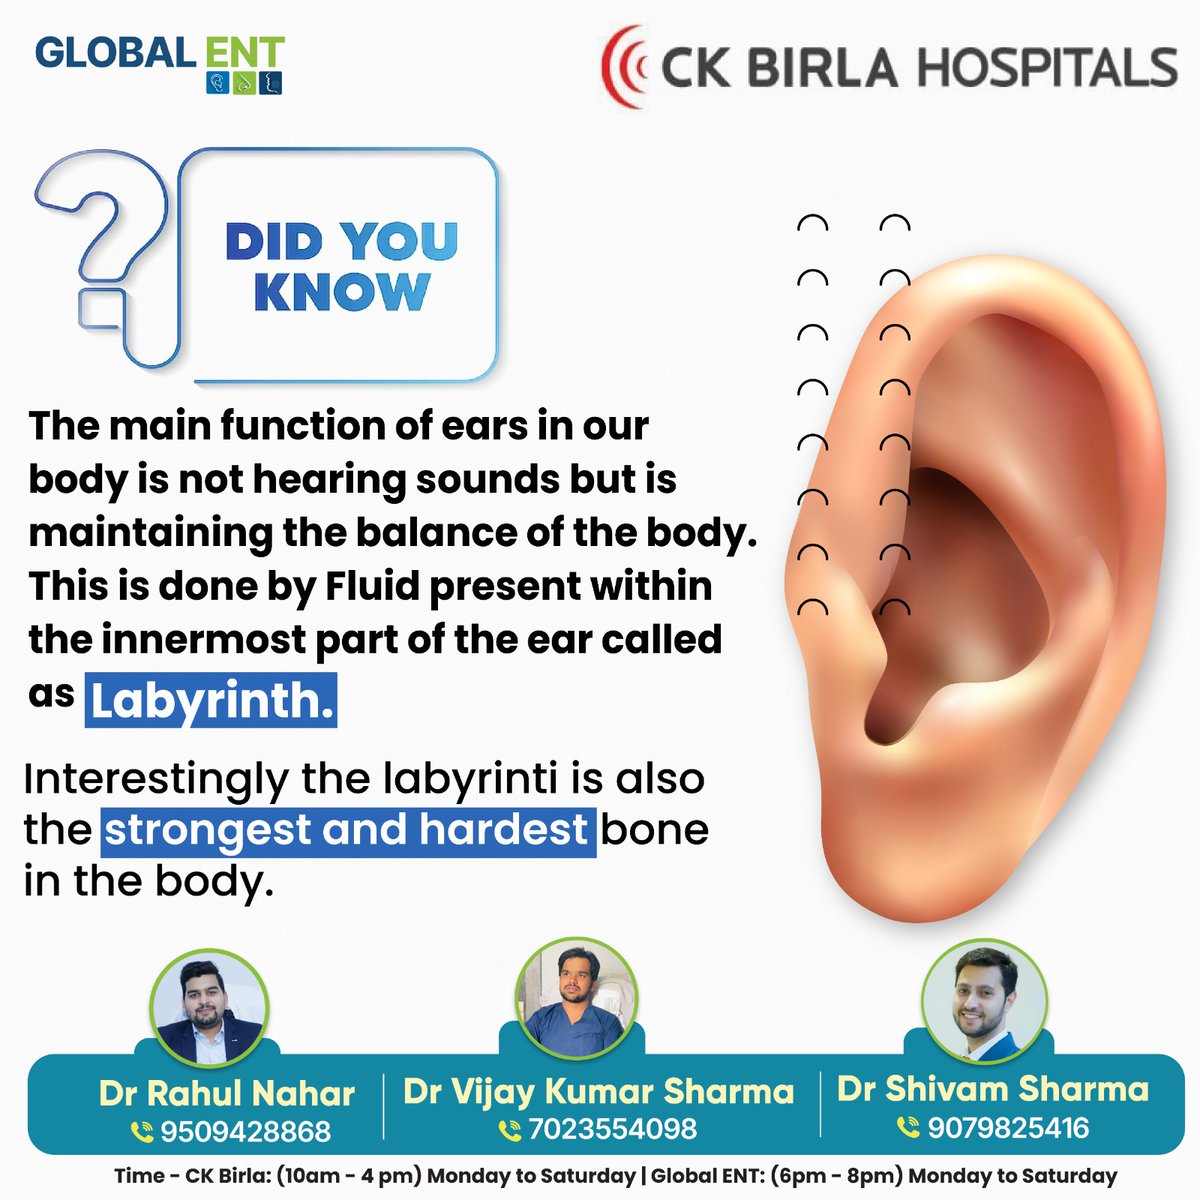 Did you know? While we often associate ears with hearing, their primary role is maintaining balance, thanks to the intricate labyrinth and fluid within. Surprisingly, the labyrinth is also the body's strongest and hardest bone.

#ENTclinic #ENTspecialist #Otolaryngologist